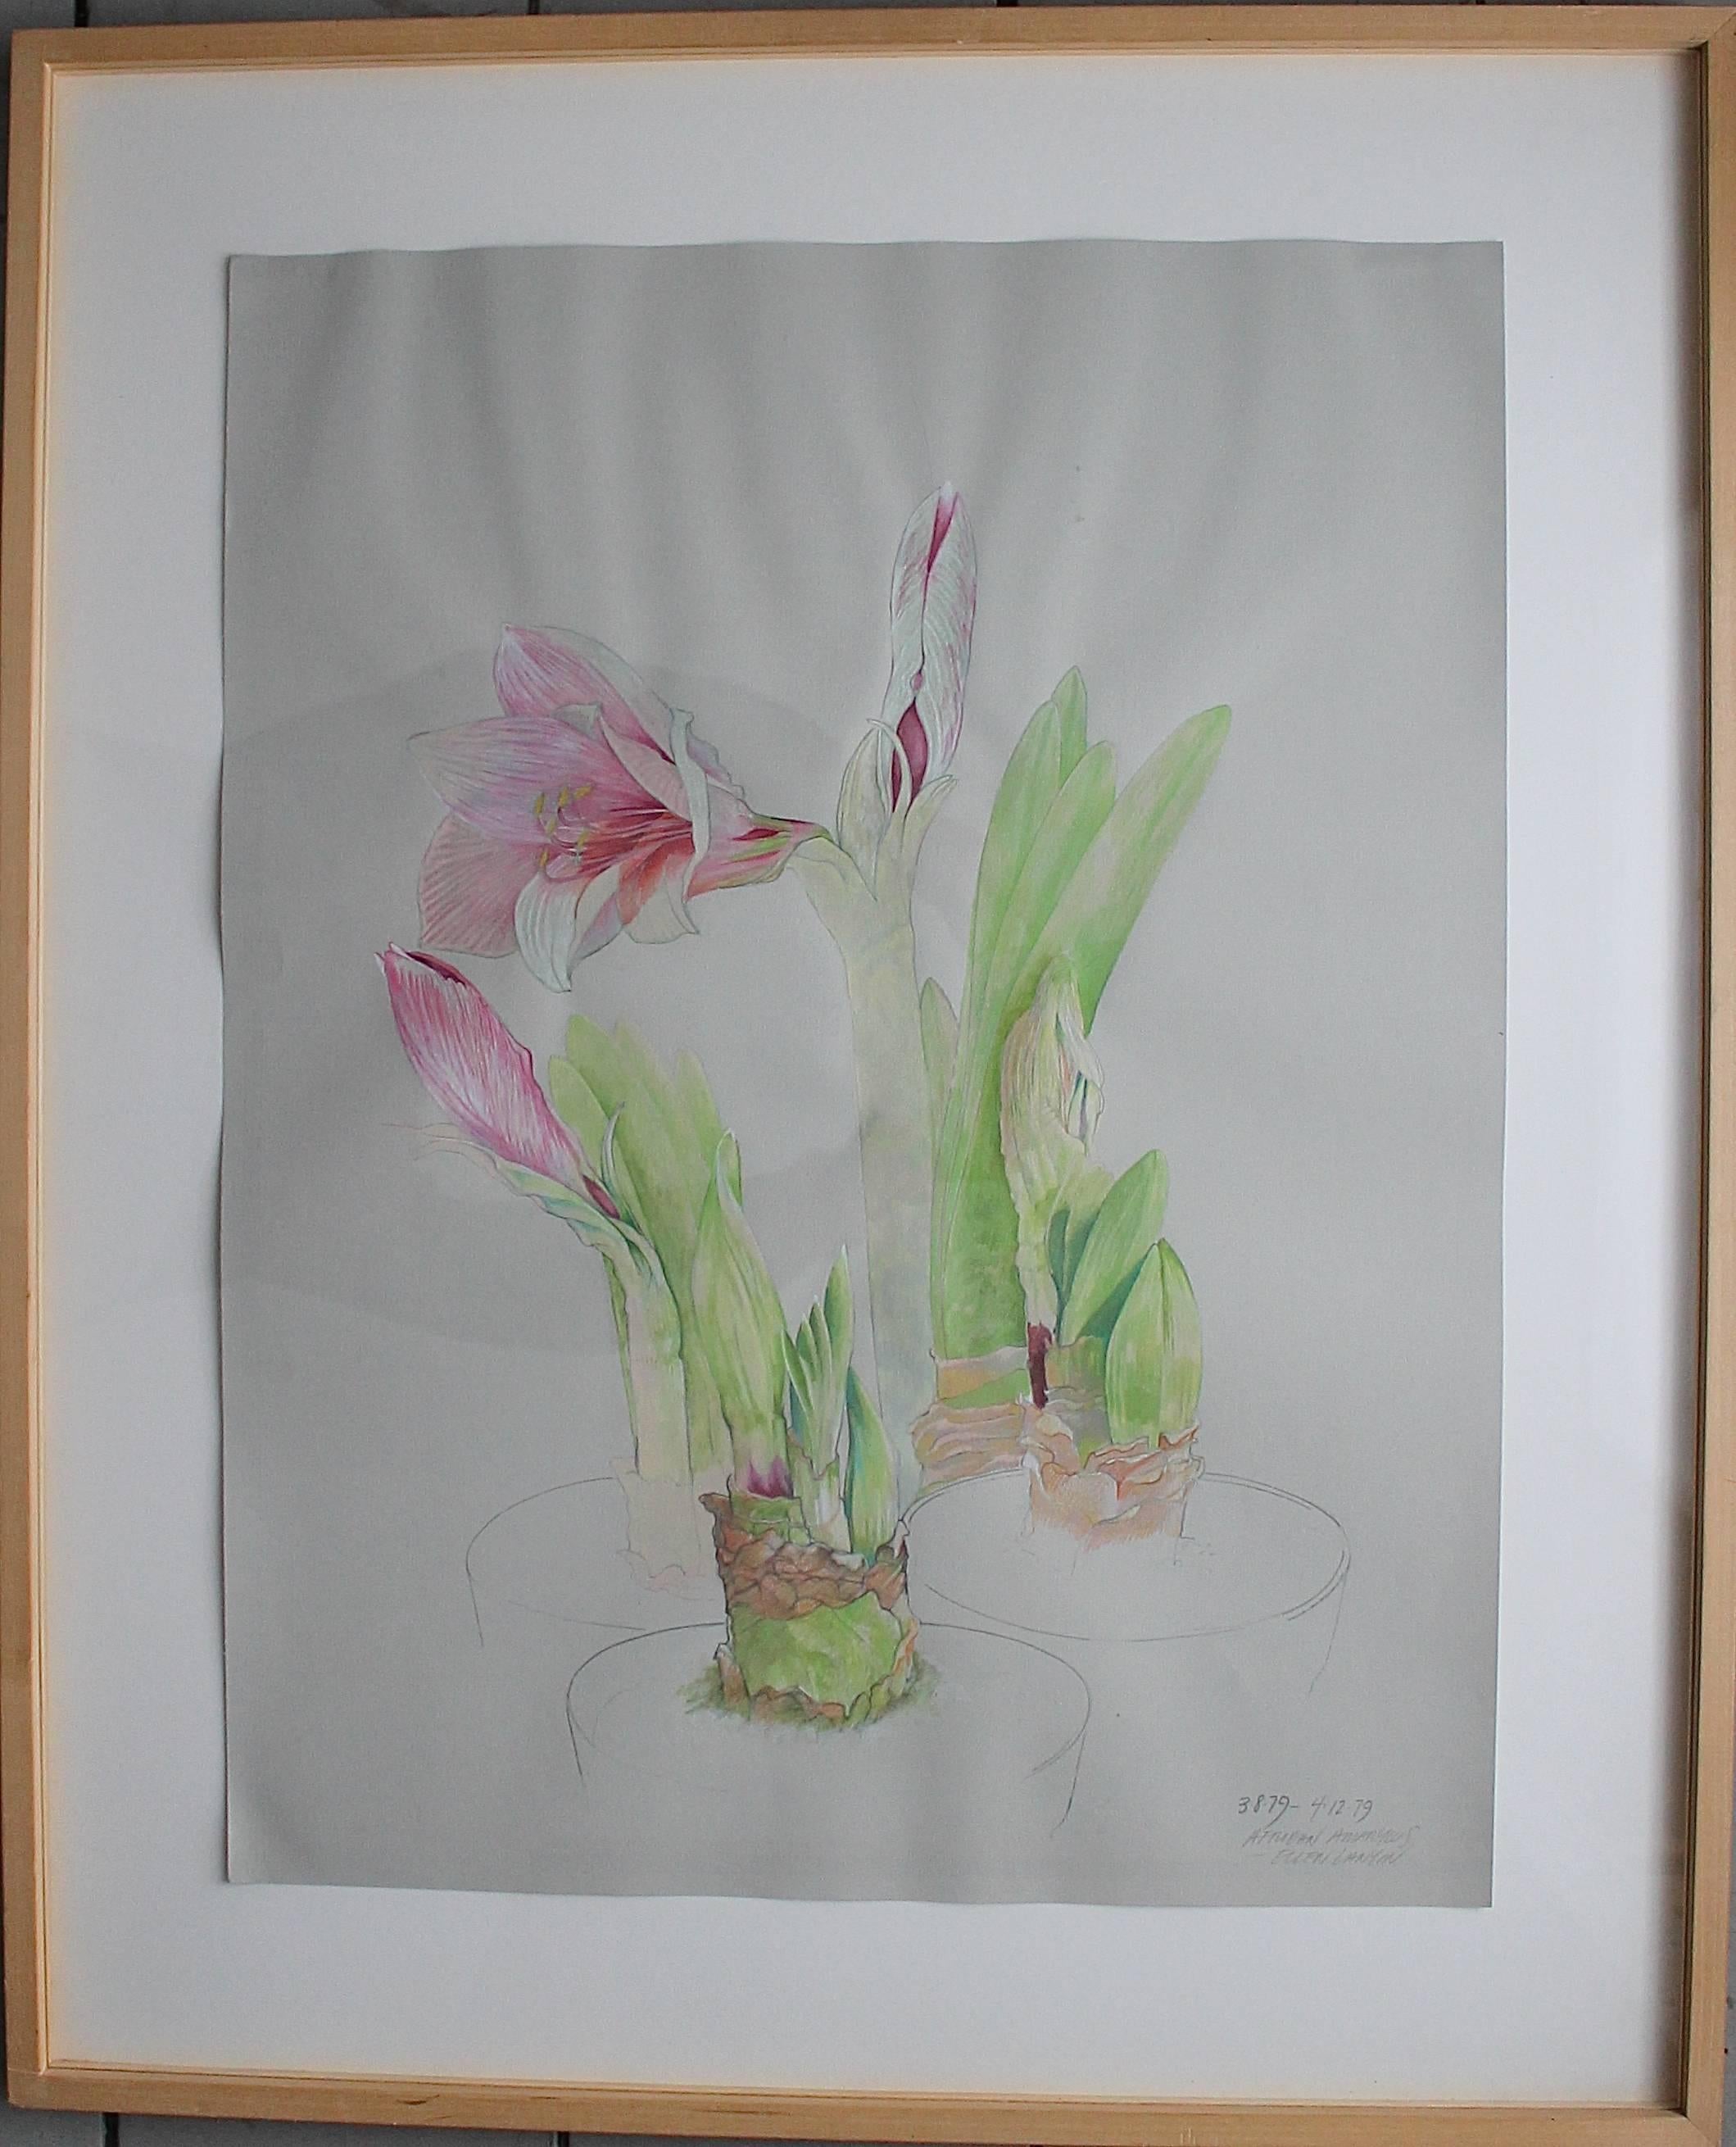 Beautiful original Ellen Lanyon prismacolor watercolor by this important and famous Chicago 'Imagist'. Retains its Richard Gray Gallery label. Framed.
  